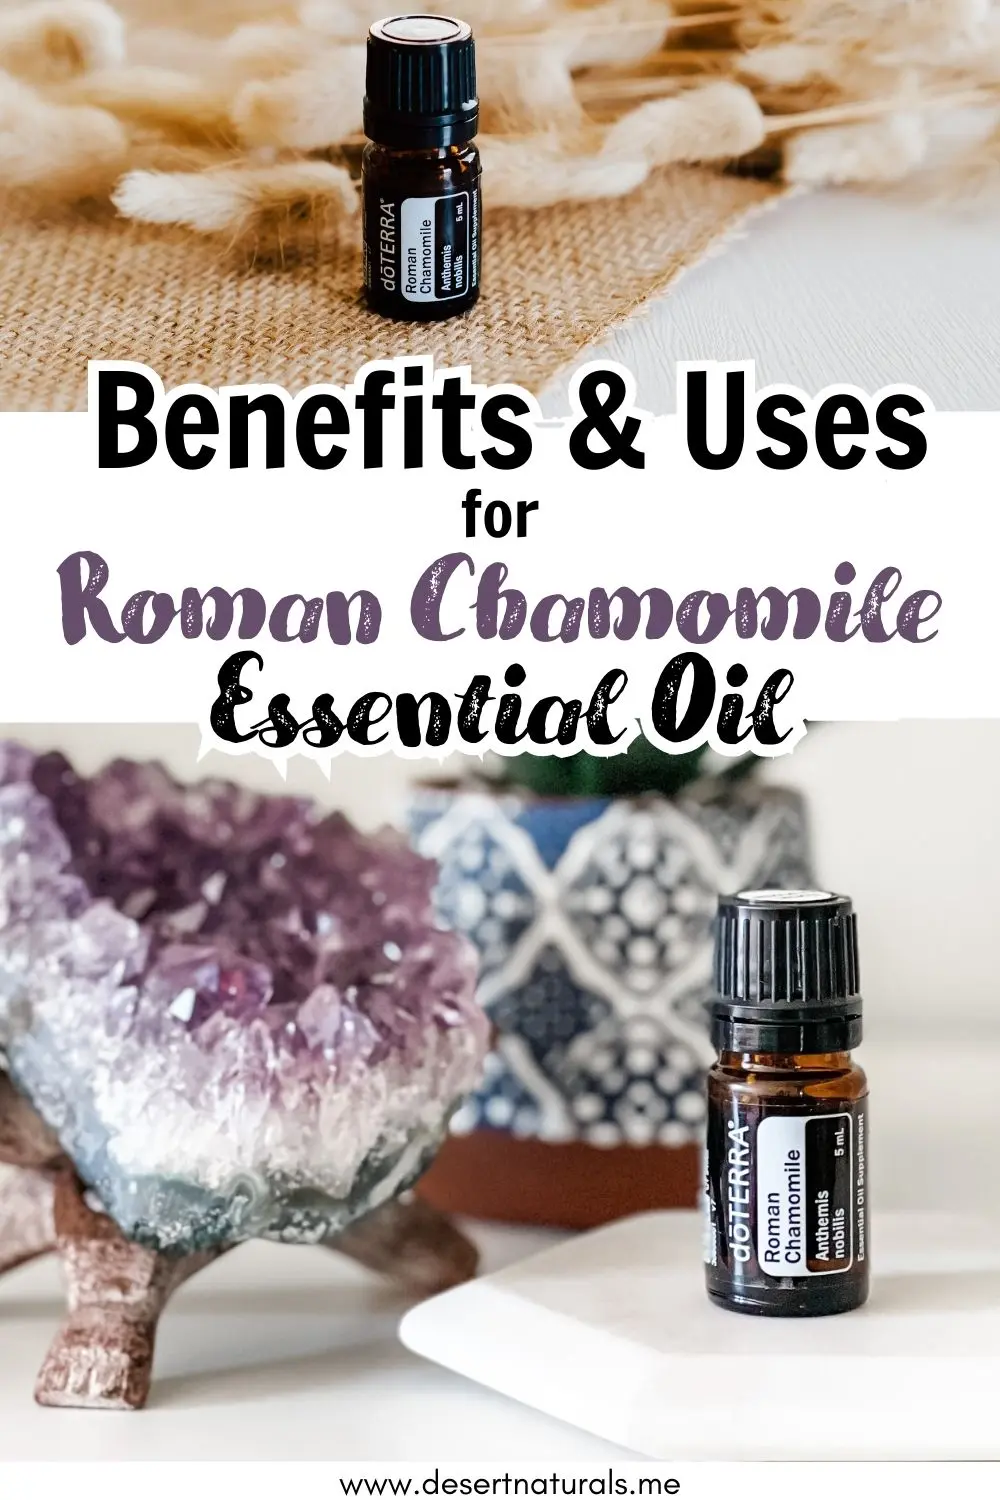 text benefits and uses for roman chamomile essential oil with amethyst and bottle of doterra roman chamomile